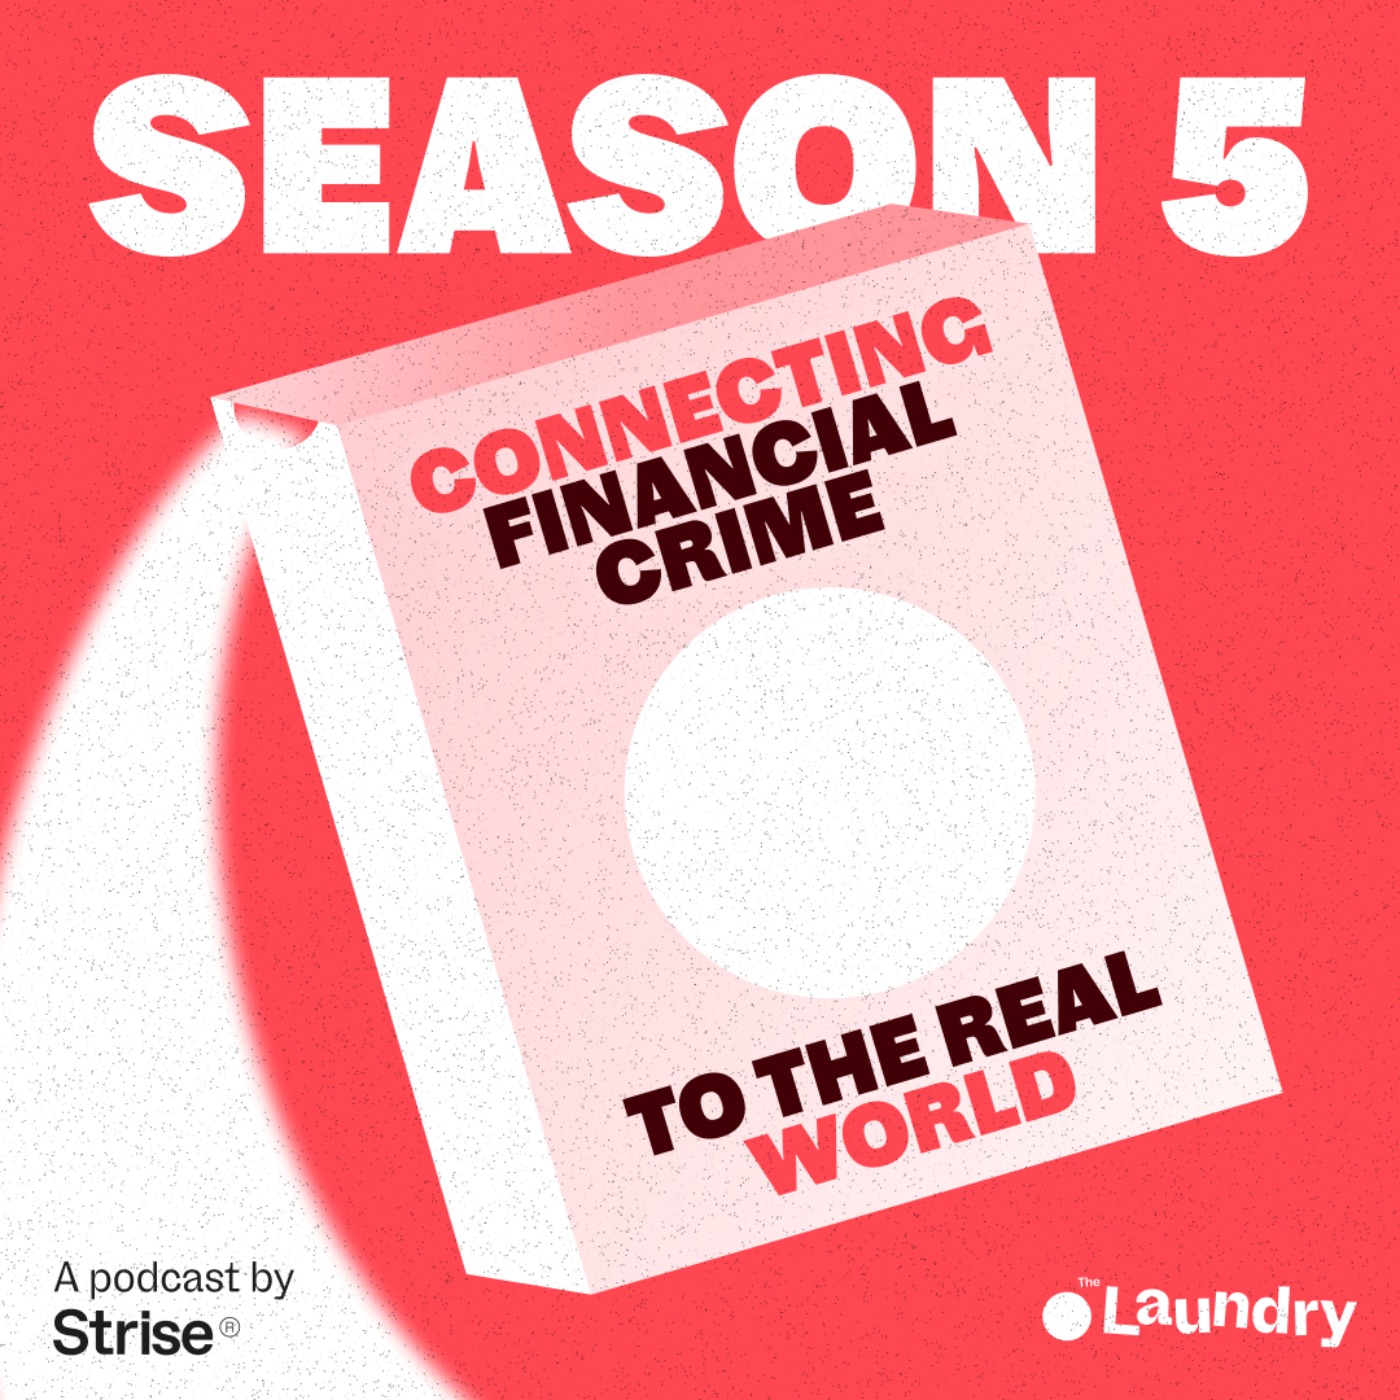 Trailer: We're a financial crime podcast, of course!